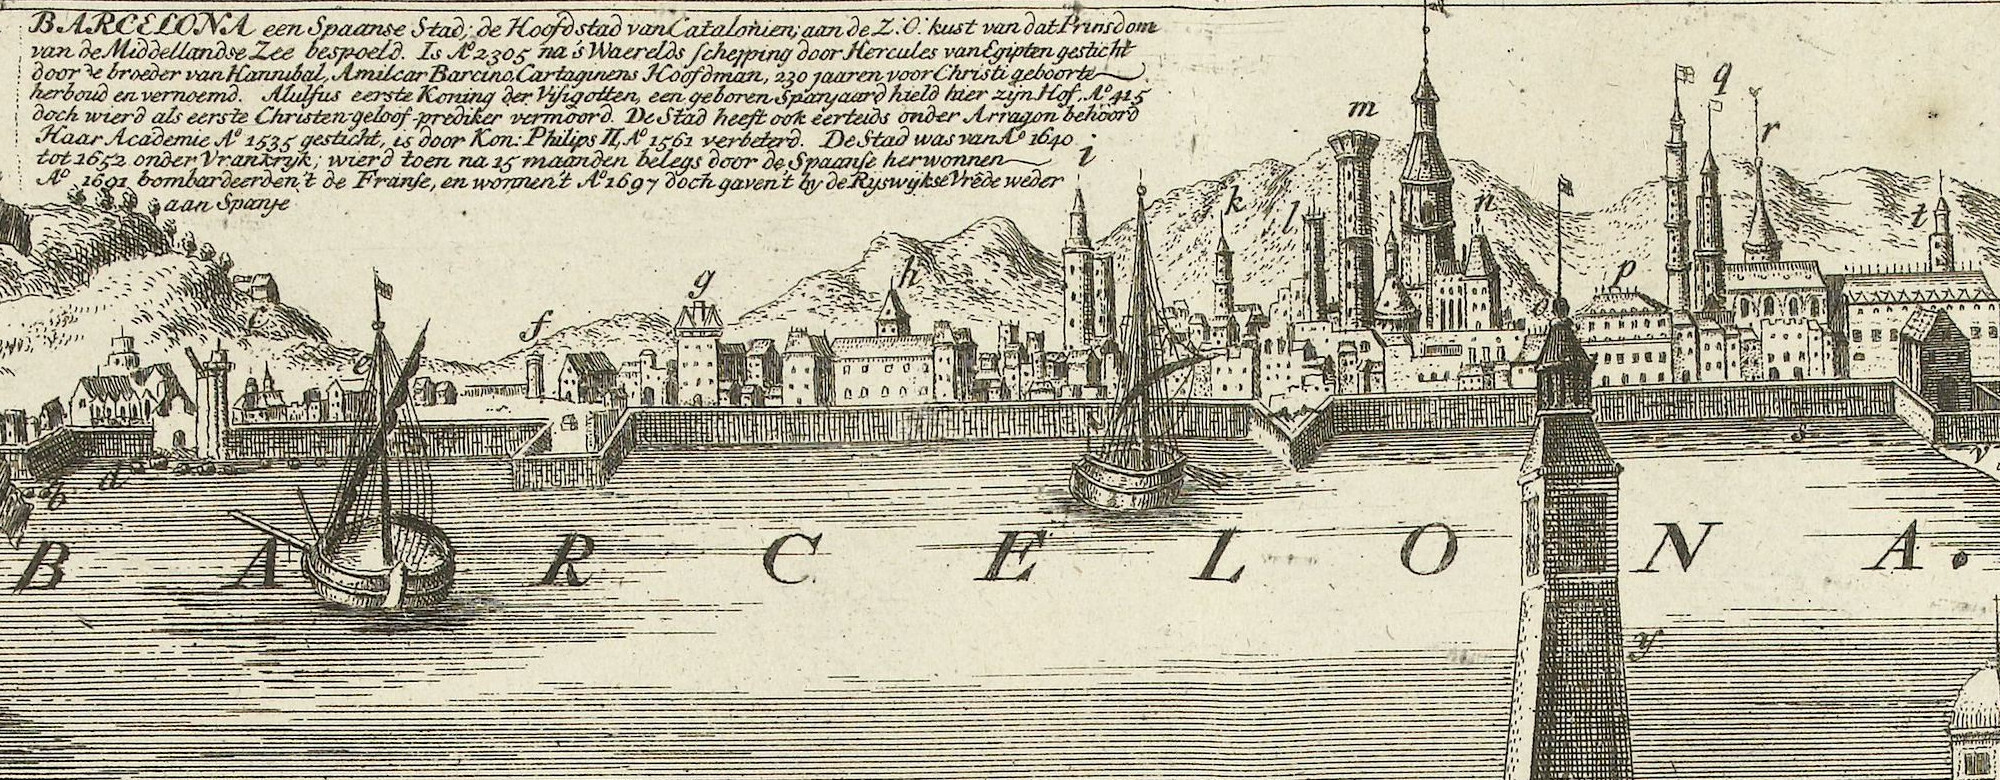 View on and map of Barcelona, ca. 1701-1713, Abraham Allard, after anonymous.